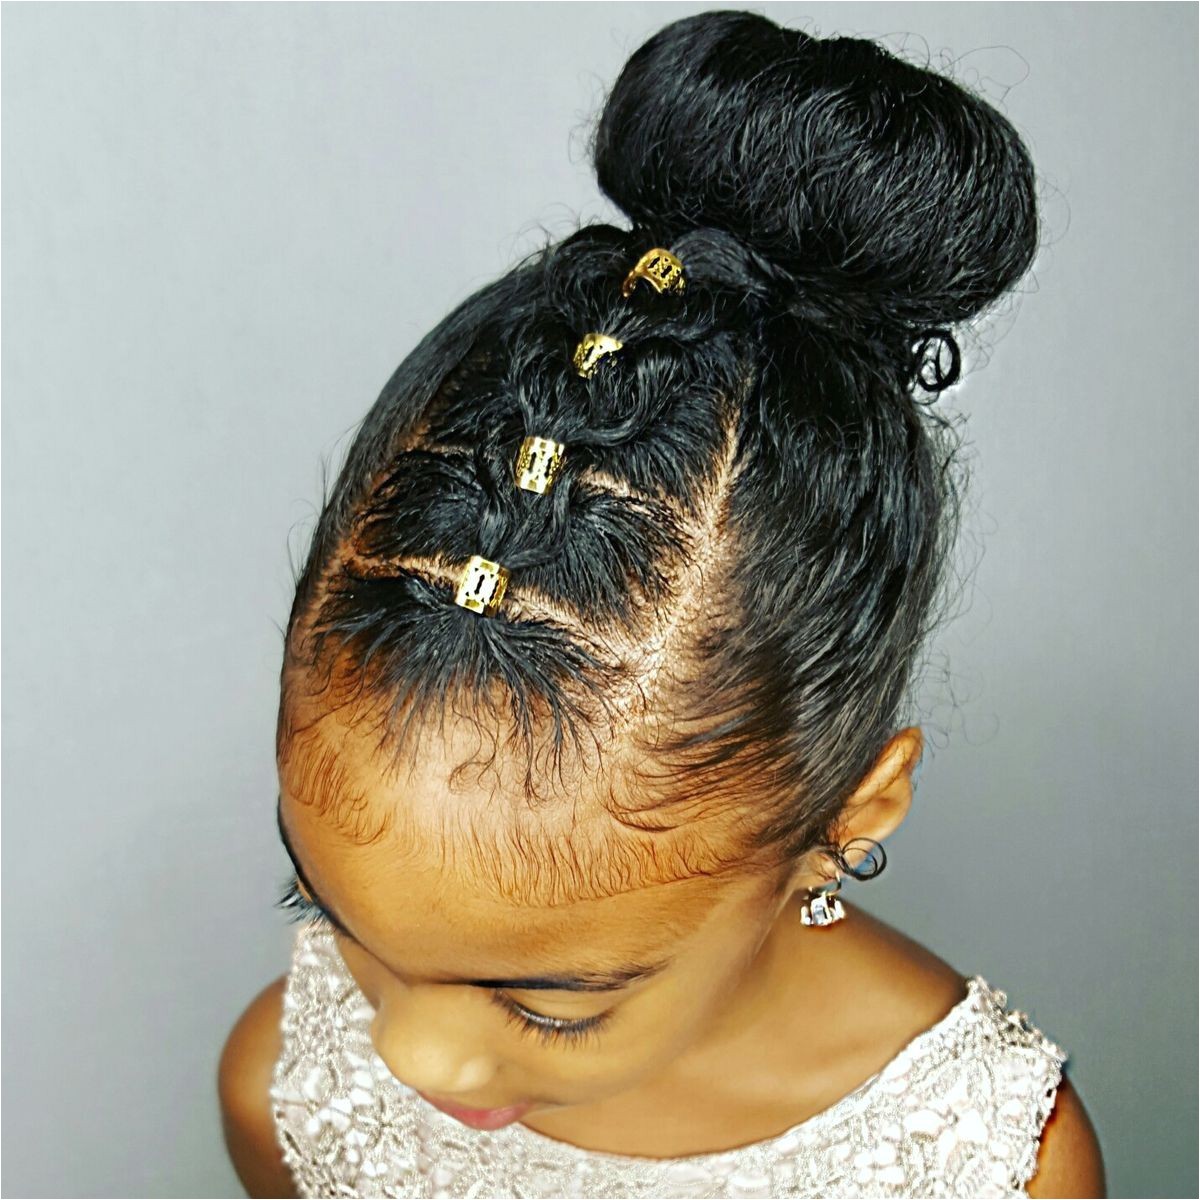 Kids hair · Hairstyles For GirlsNatural